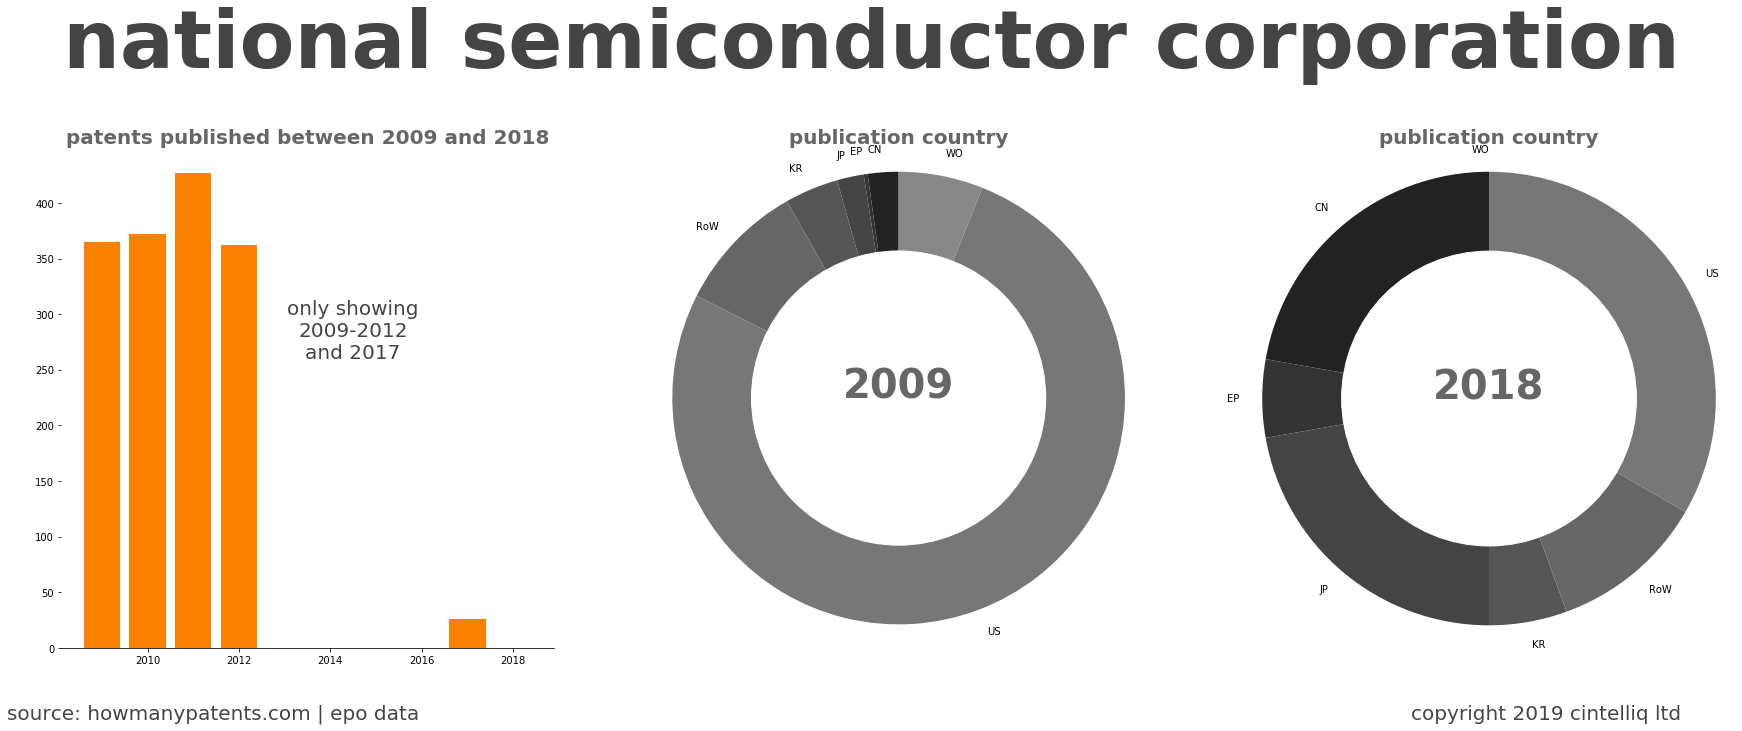 summary of patents for National Semiconductor Corporation